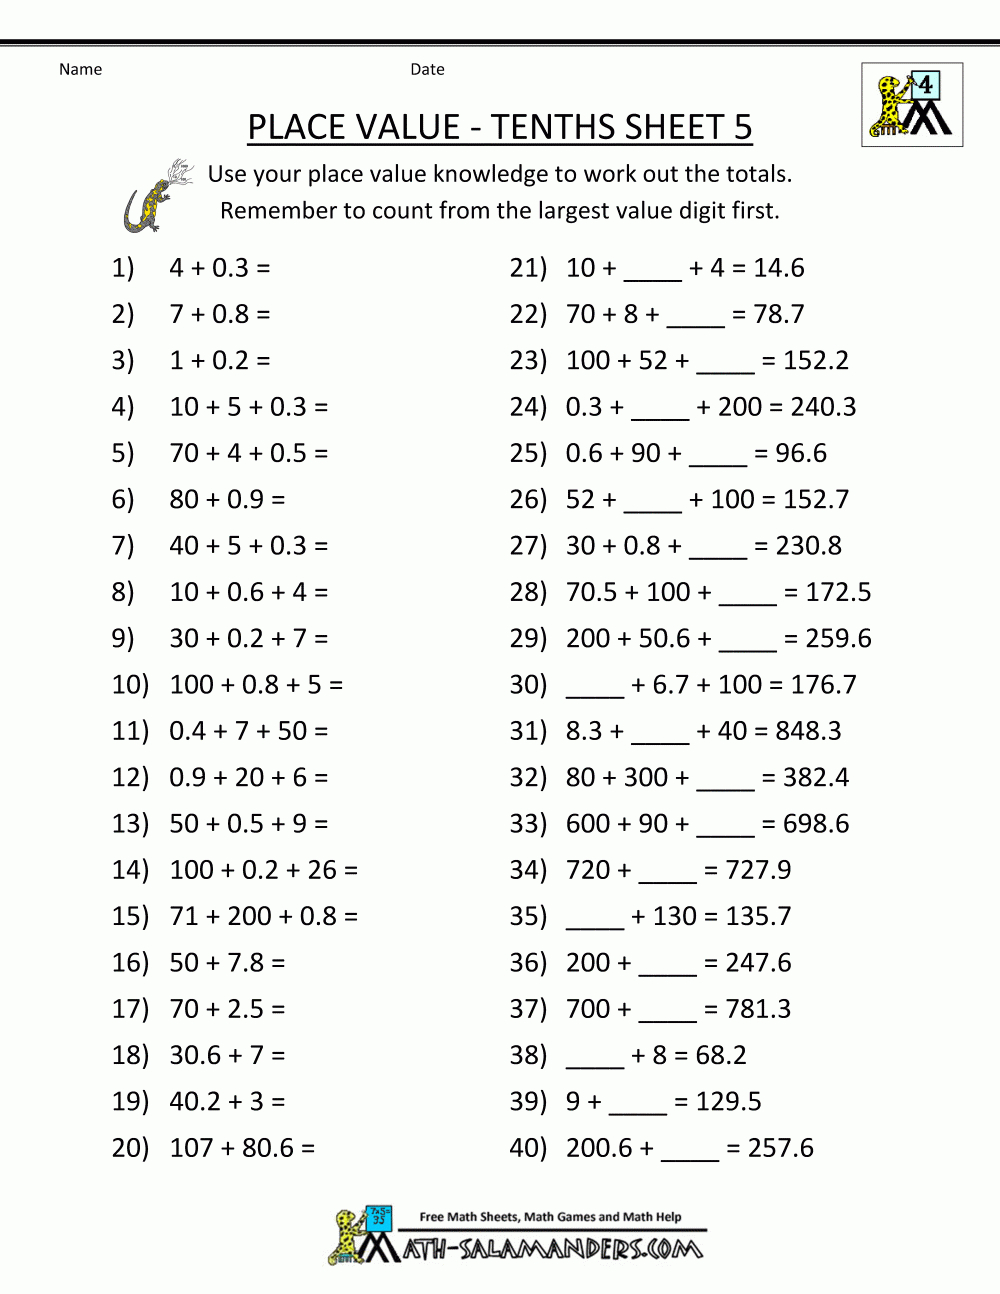 Free Online Math Worksheets Place Value Tenths 5 | Math | Math - Free Printable Place Value Worksheets